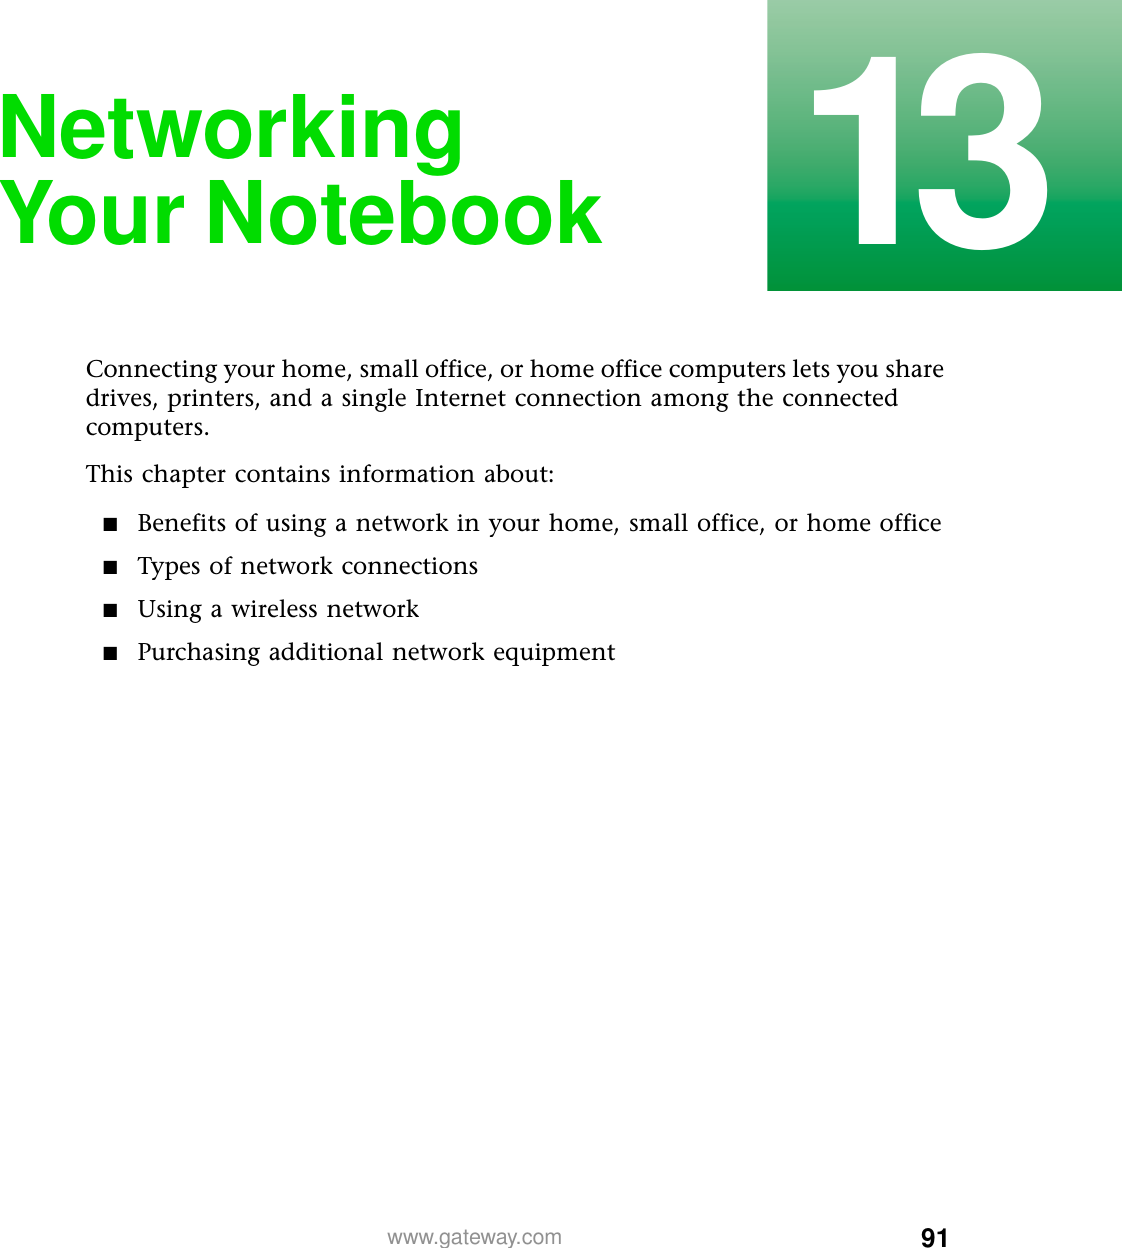 9113www.gateway.comNetworking Your NotebookConnecting your home, small office, or home office computers lets you share drives, printers, and a single Internet connection among the connected computers.This chapter contains information about:■Benefits of using a network in your home, small office, or home office■Types of network connections■Using a wireless network■Purchasing additional network equipment